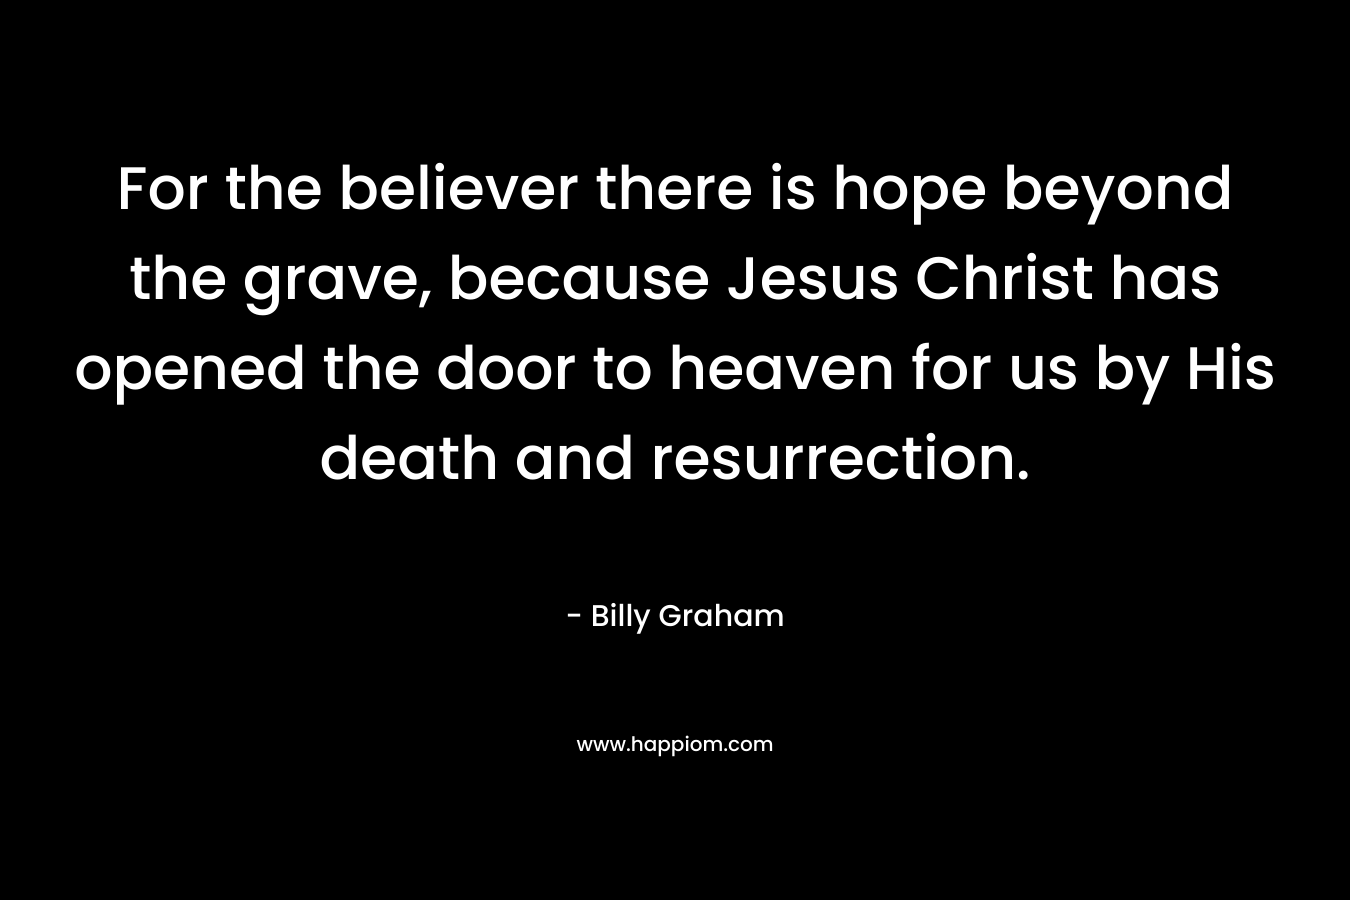 For the believer there is hope beyond the grave, because Jesus Christ has opened the door to heaven for us by His death and resurrection.